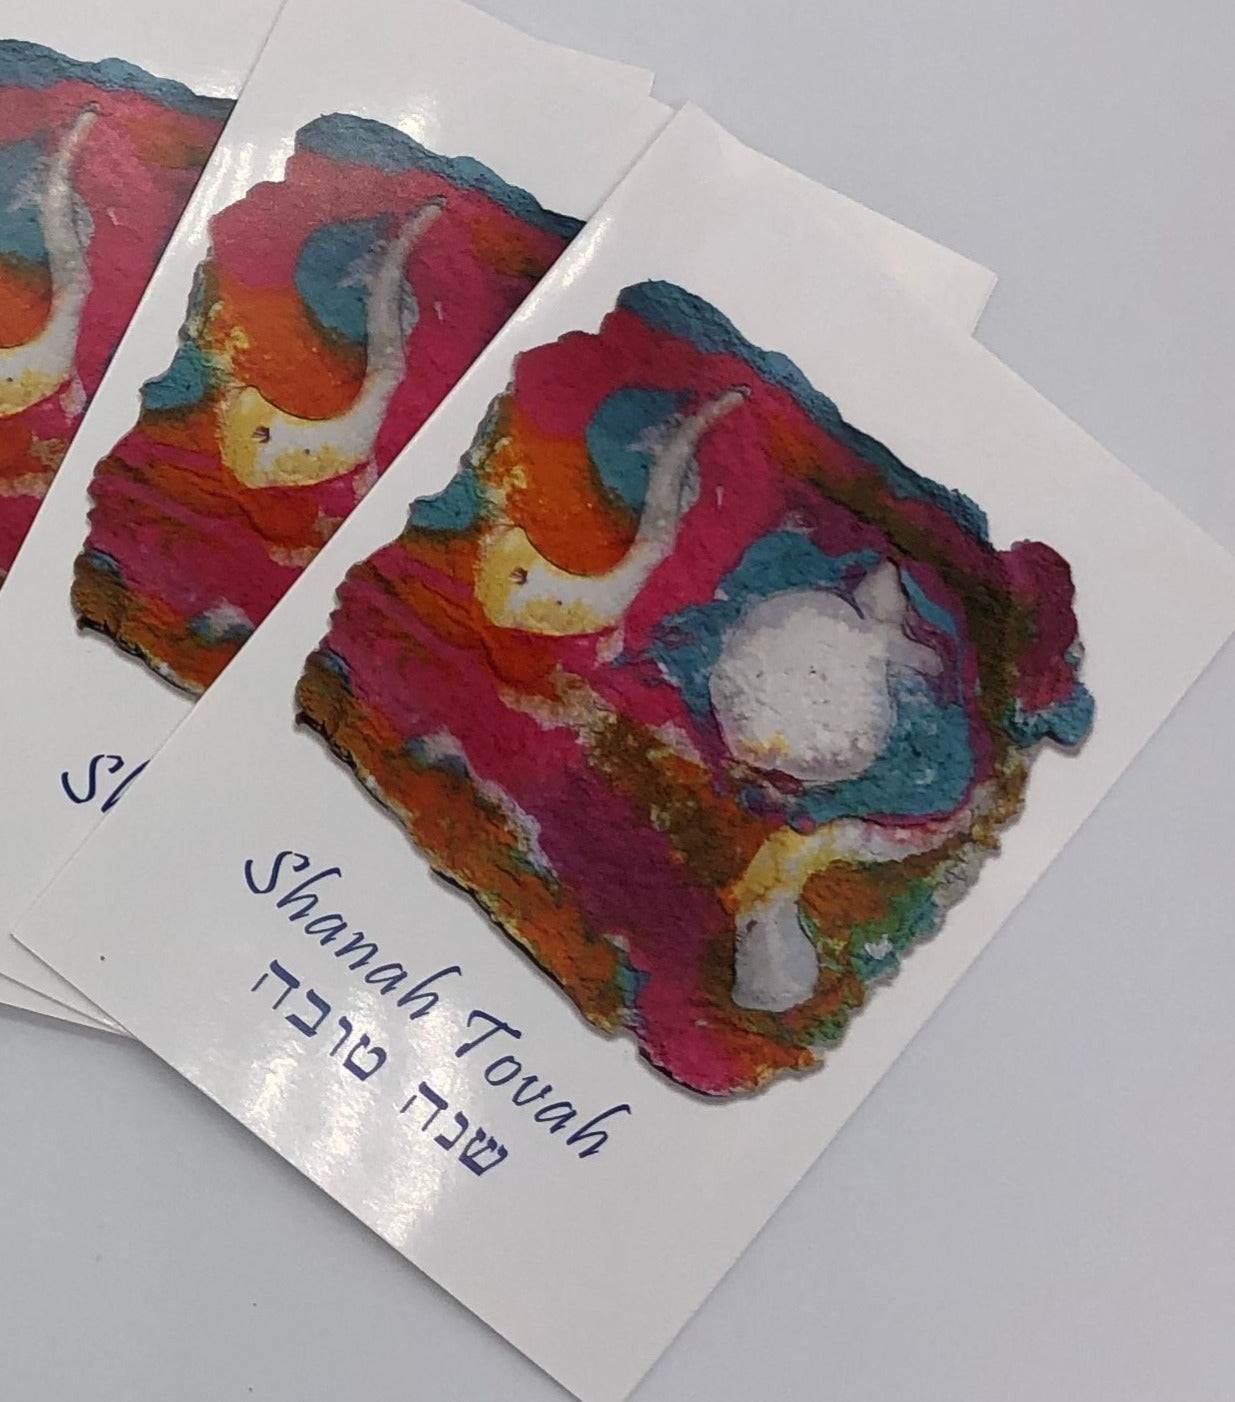 Graphic cards depicting original artwork with teal, pink and orange tones with white shofars above blue writing with both English and Hebrew Shanah Tovah